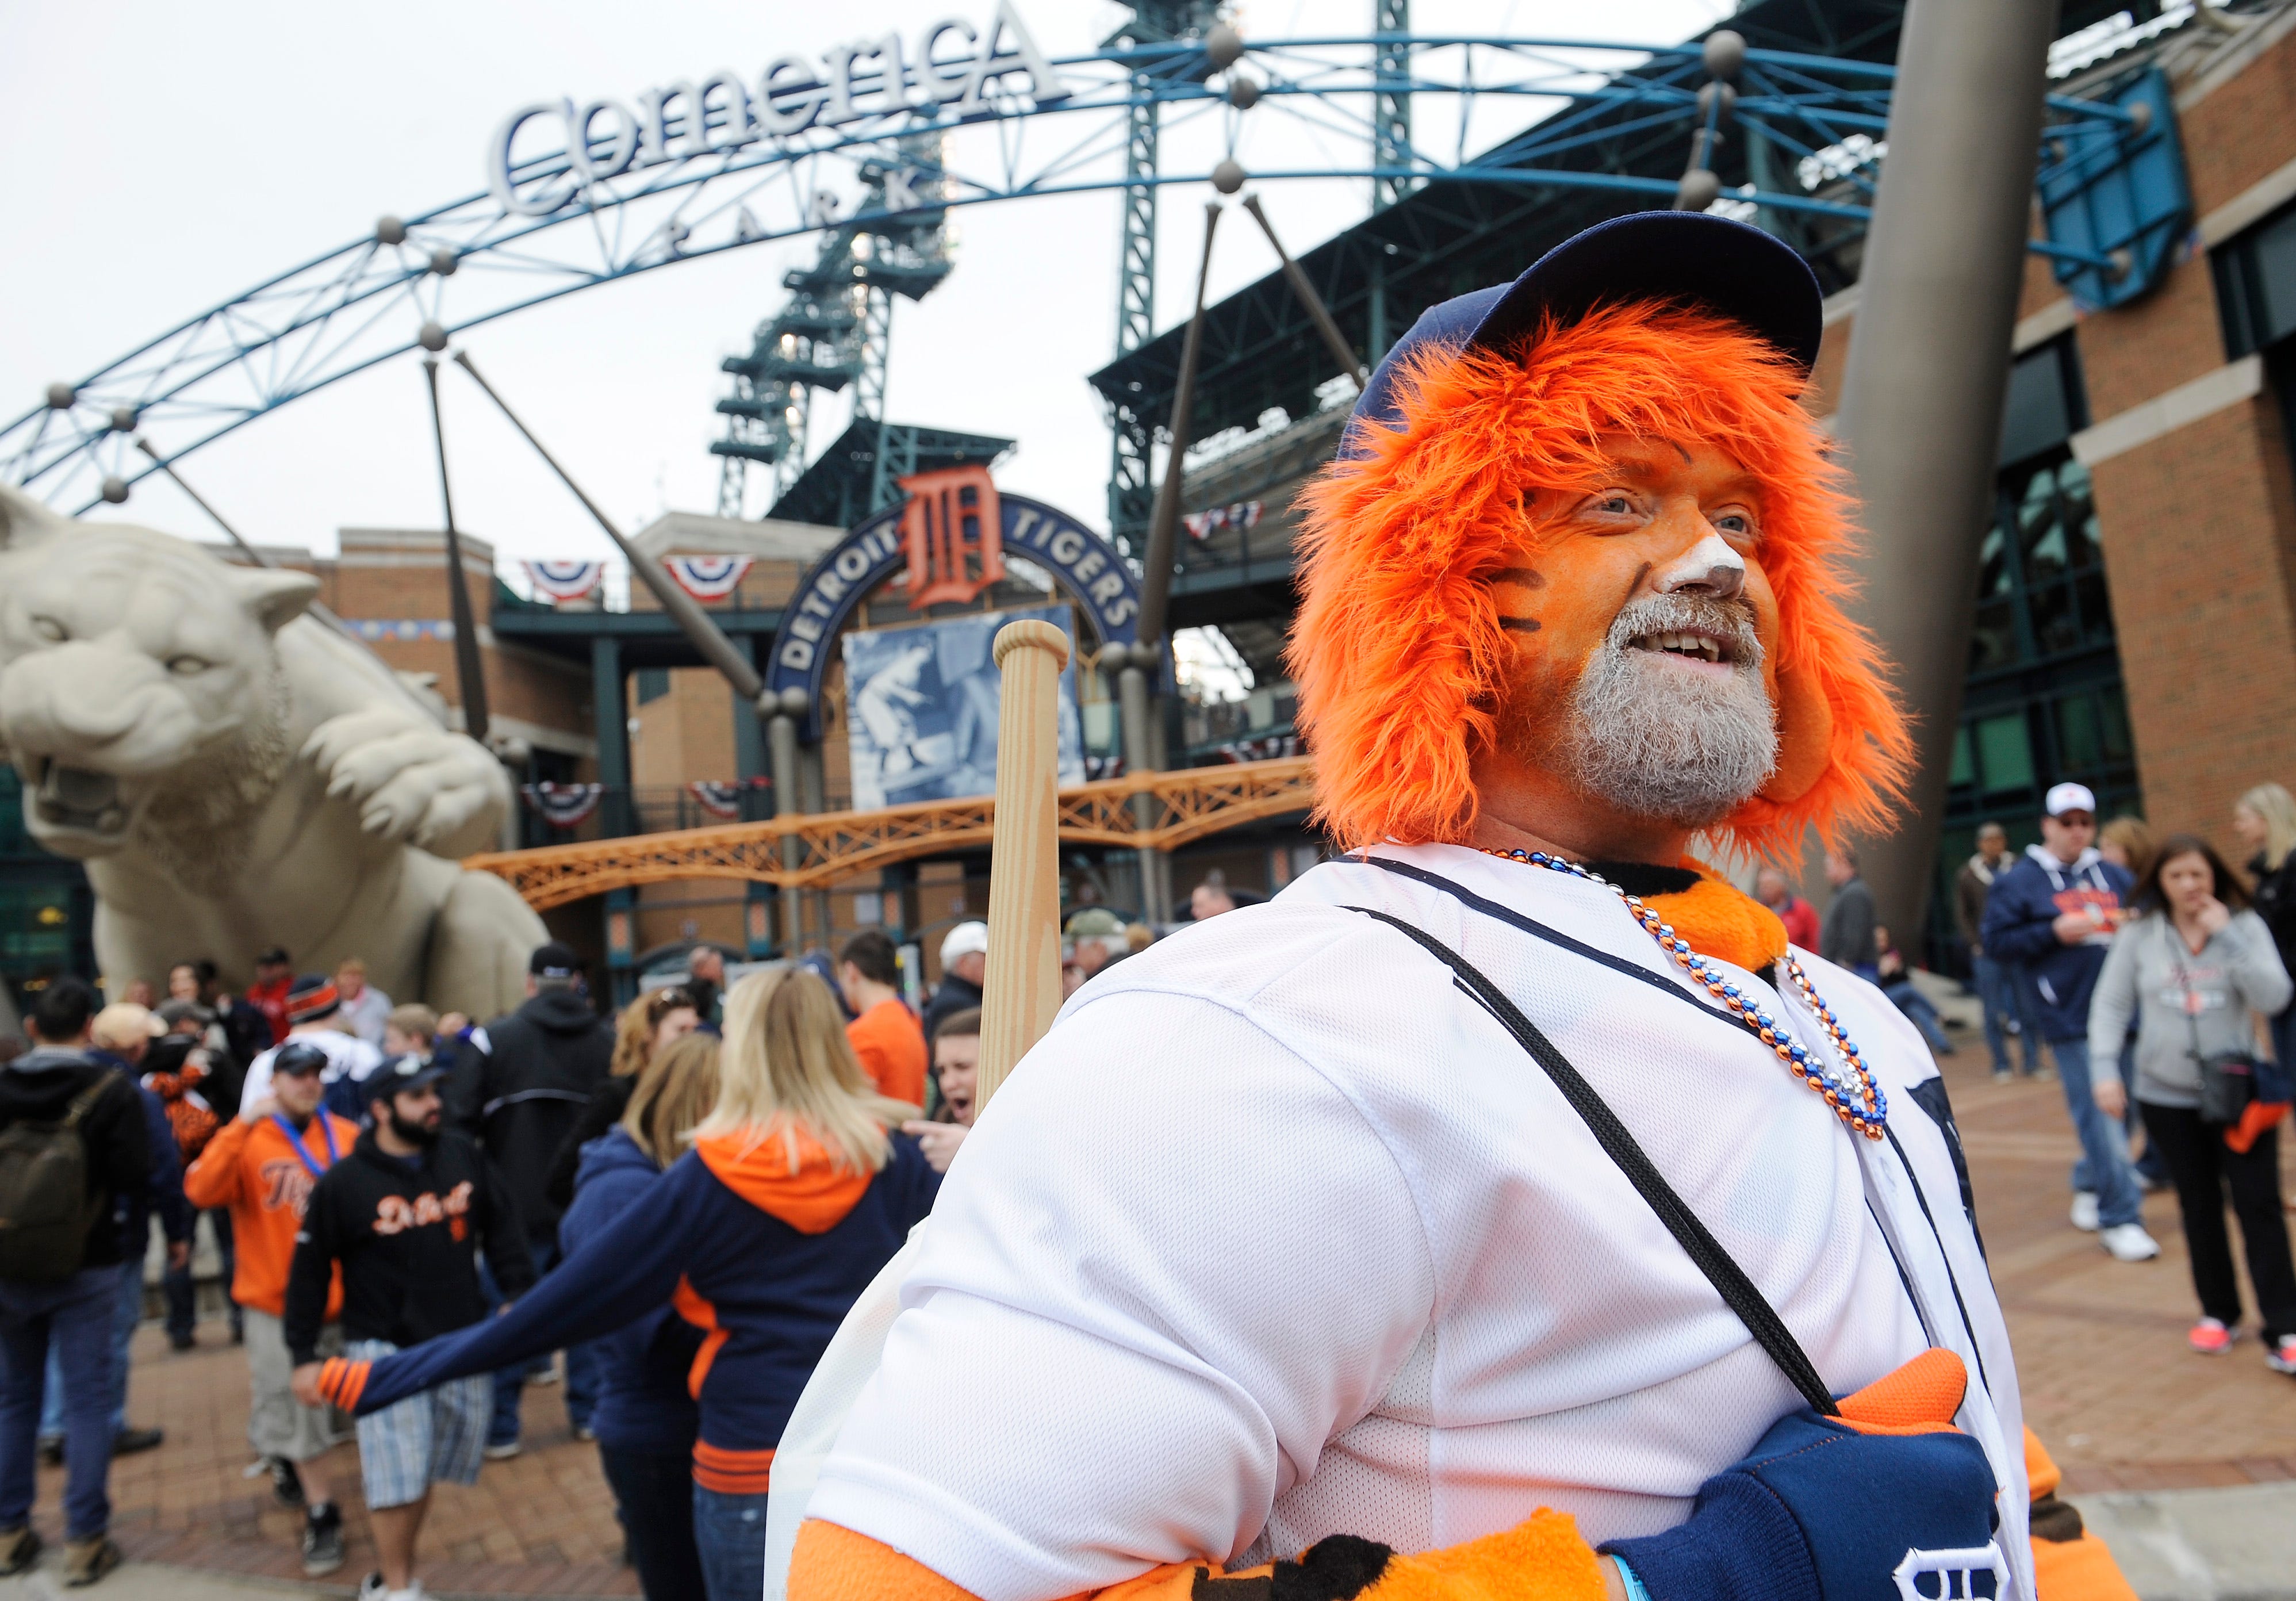 Ernie Bailey, 47, of Southgate is ready for the season opener.Detroit Tigers Opening Day at Comerica Park, Detroit, MI.